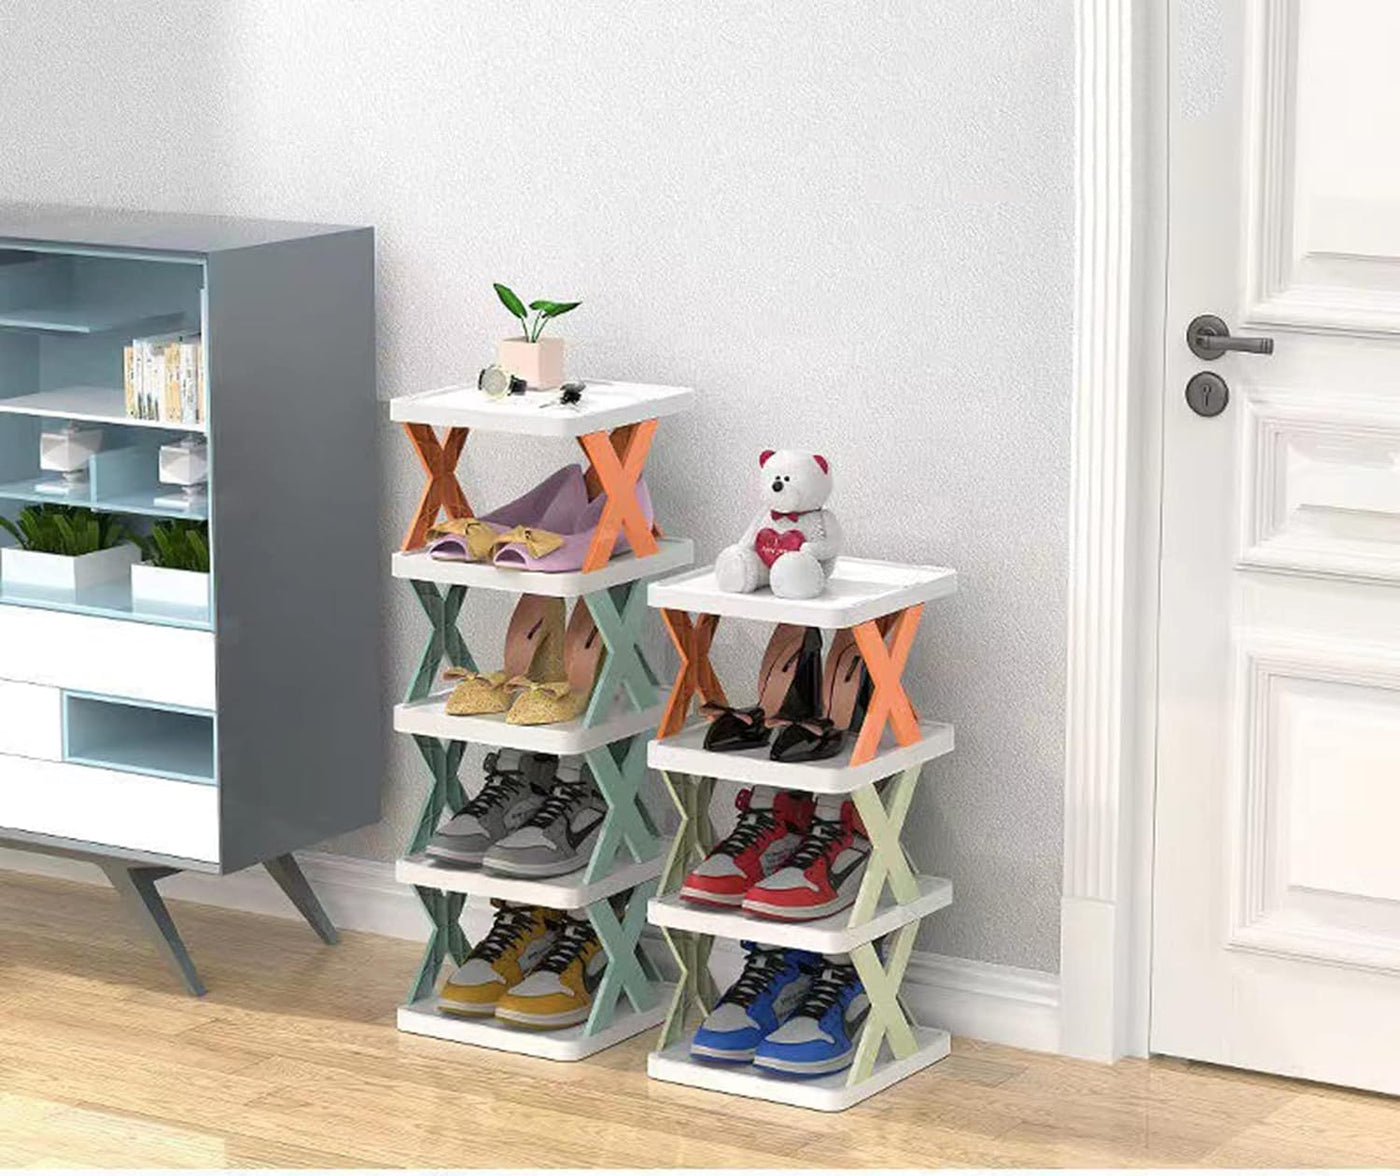 6 Tier Shoes Storage Cabinet for Saving Space-Green